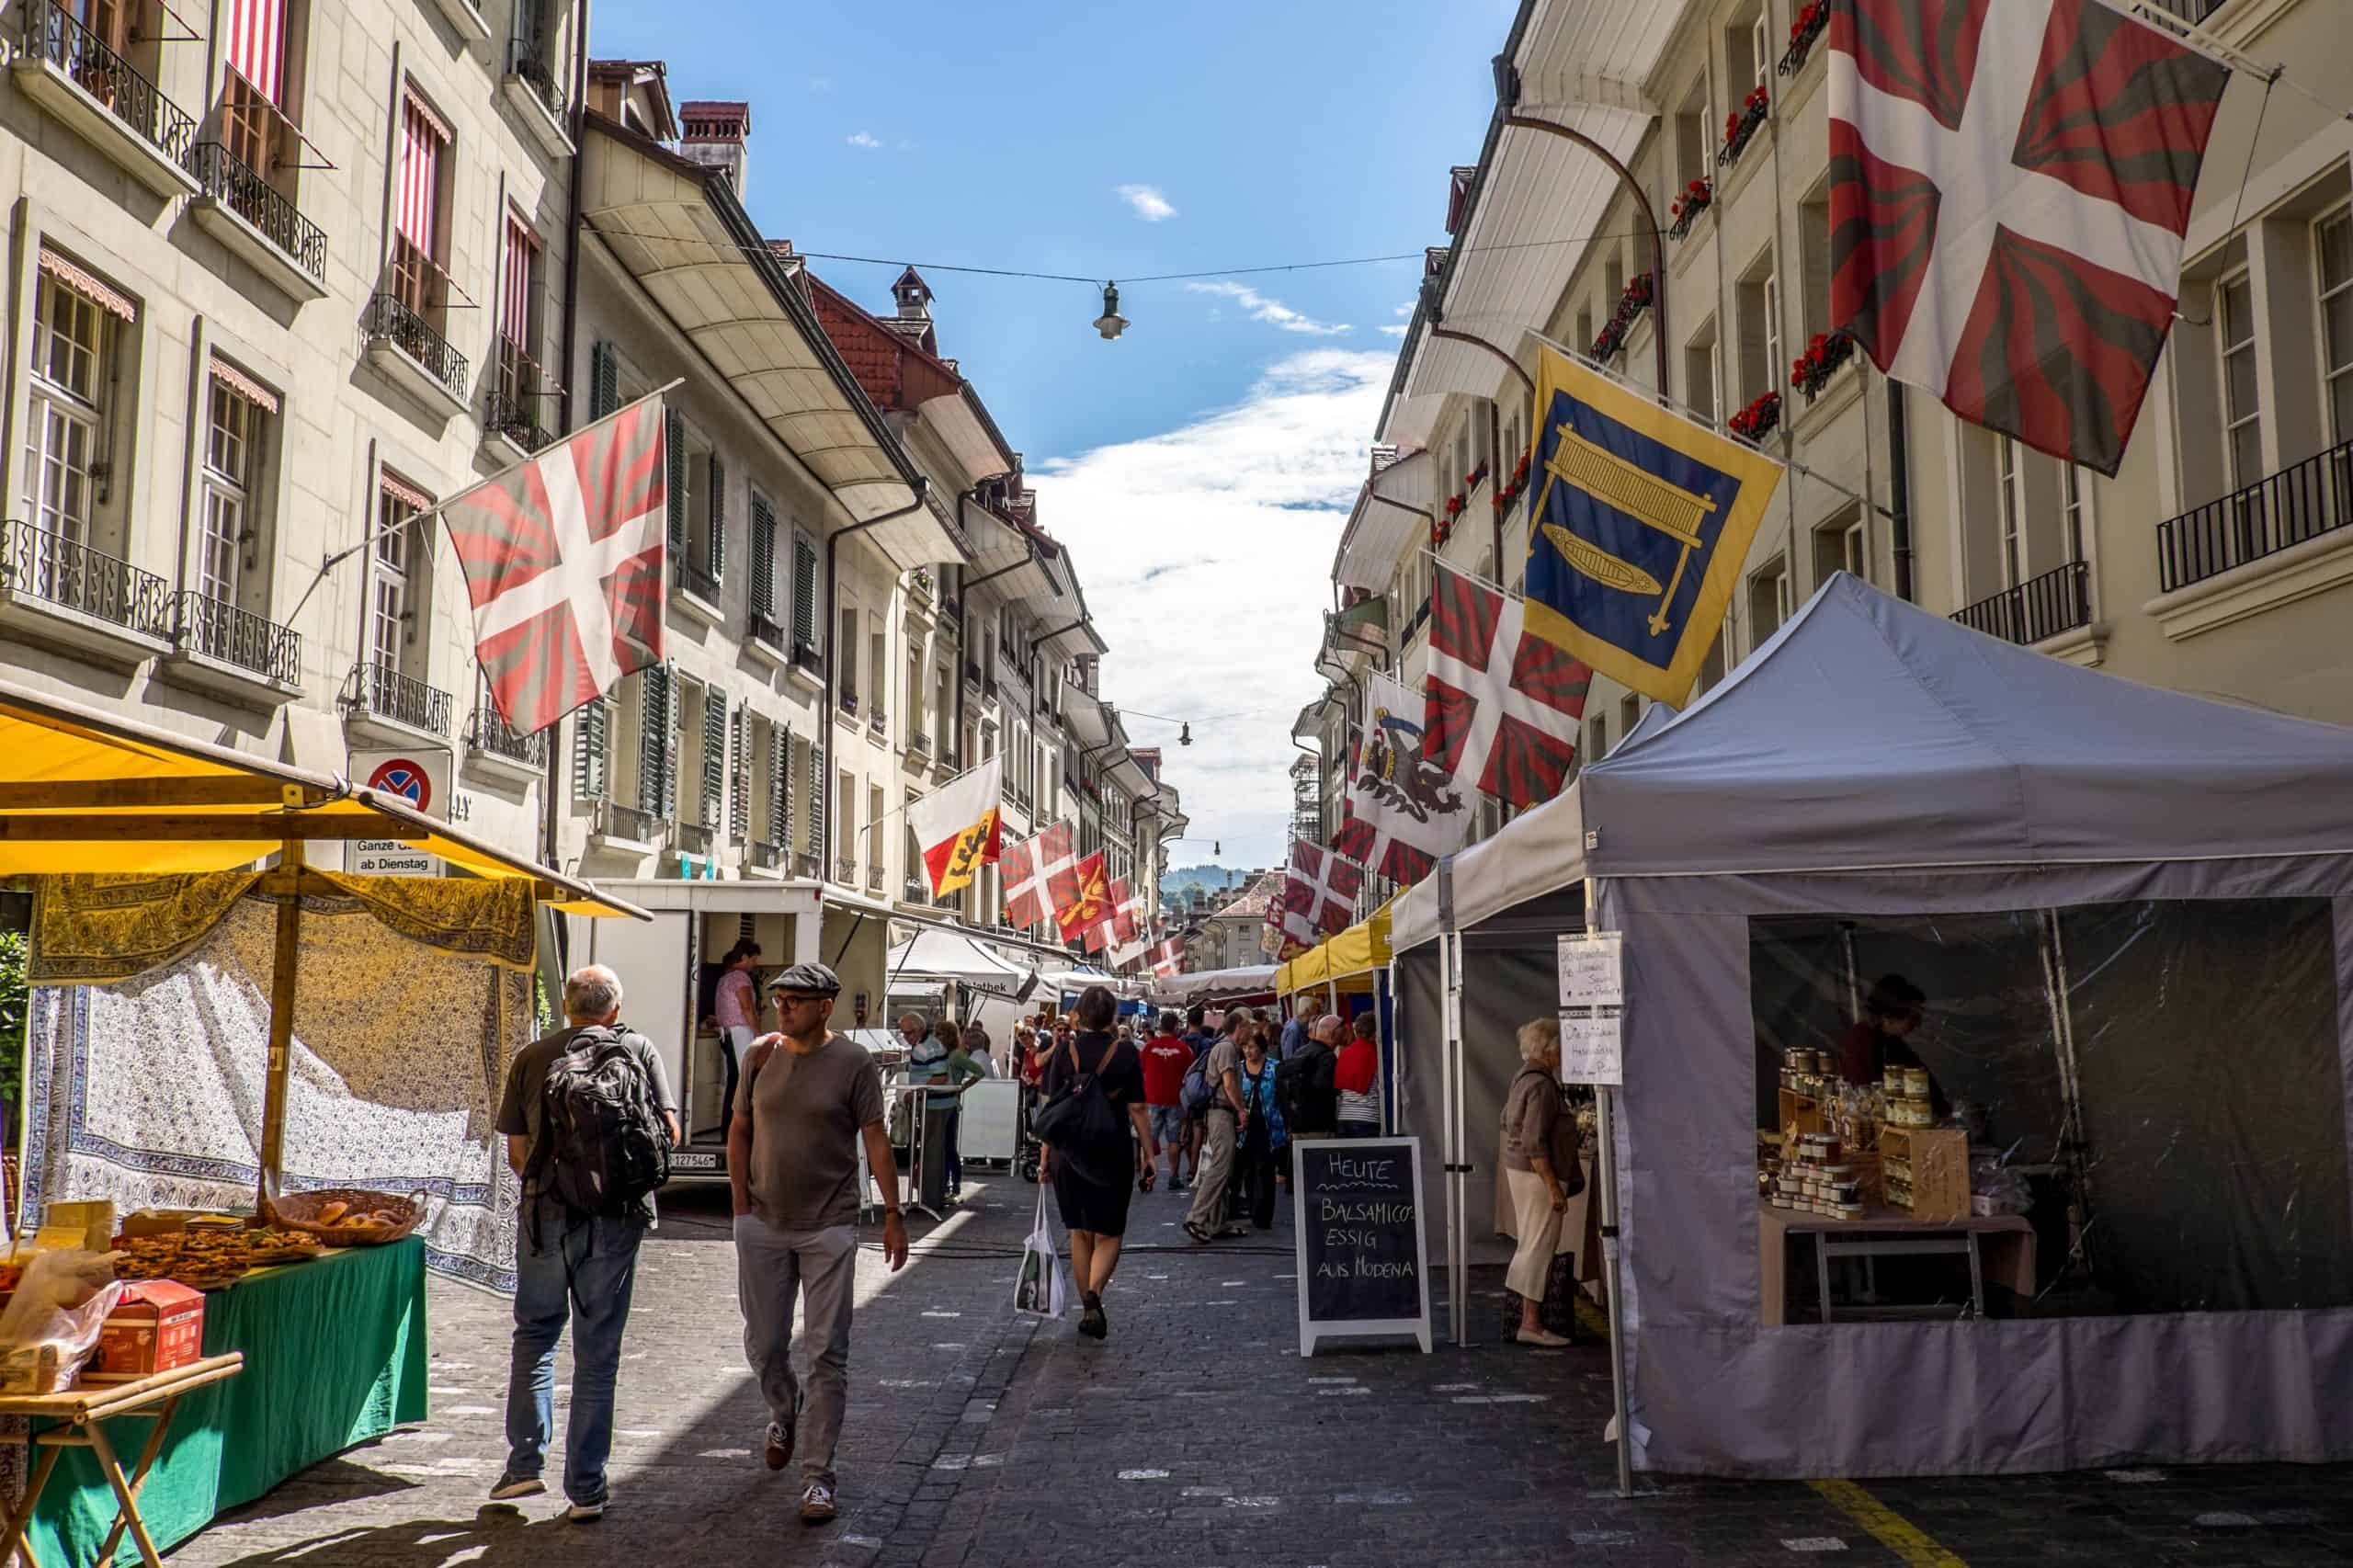 The weekend farmer's market in Bern on a street filed with red and yellow flags